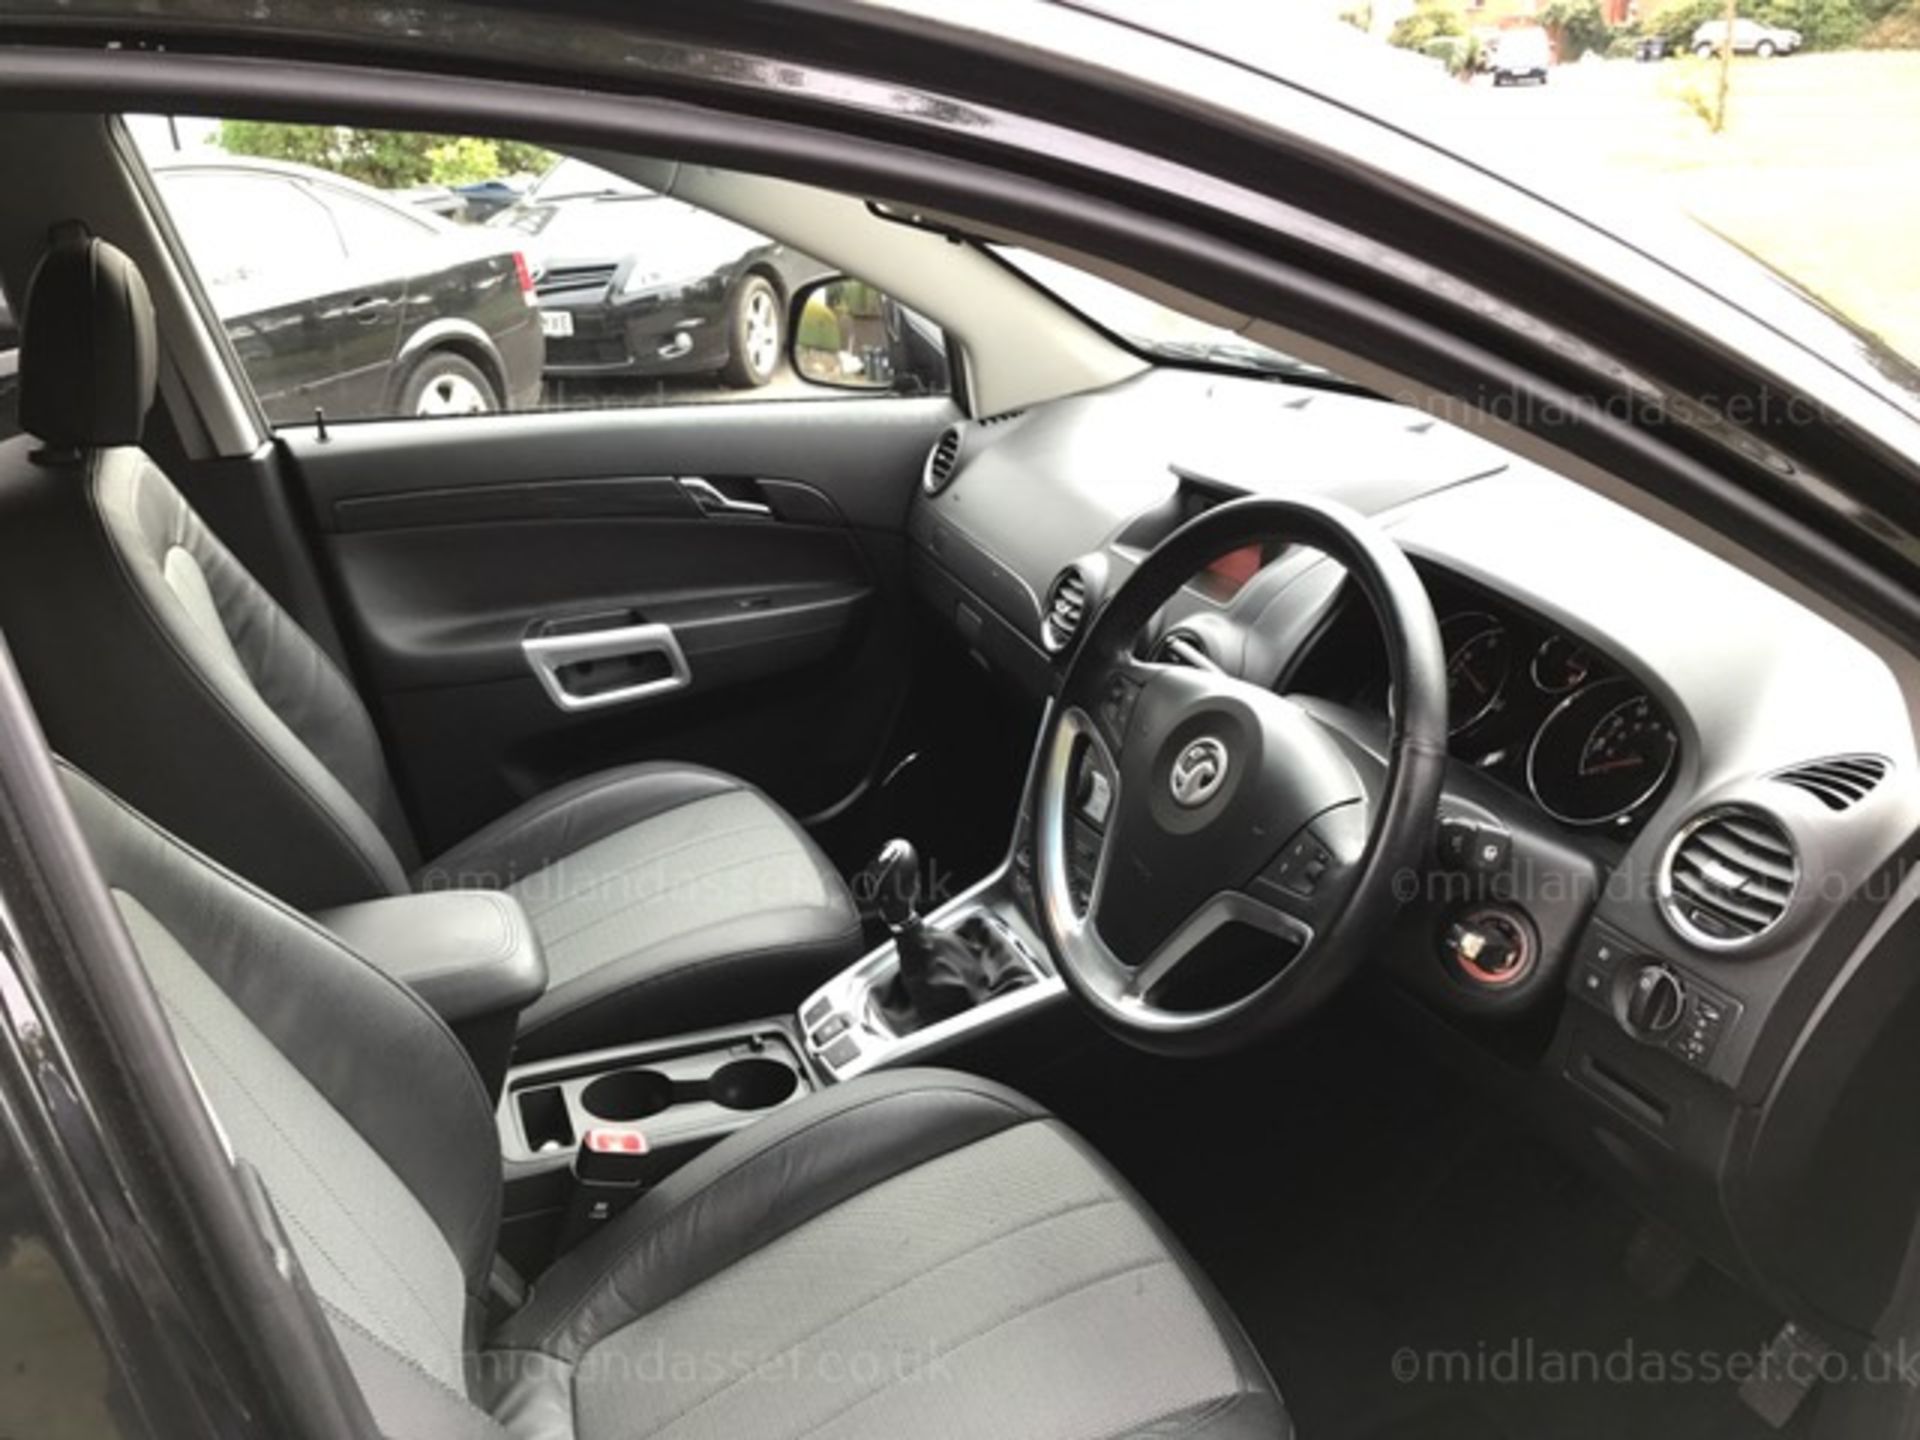 2015/15 REG VAUXHALL ANTARA EXCLUSIVE 2.2 CDTI ONE FORMER KEEPER FULL SERVICE HISTORY - Image 5 of 9